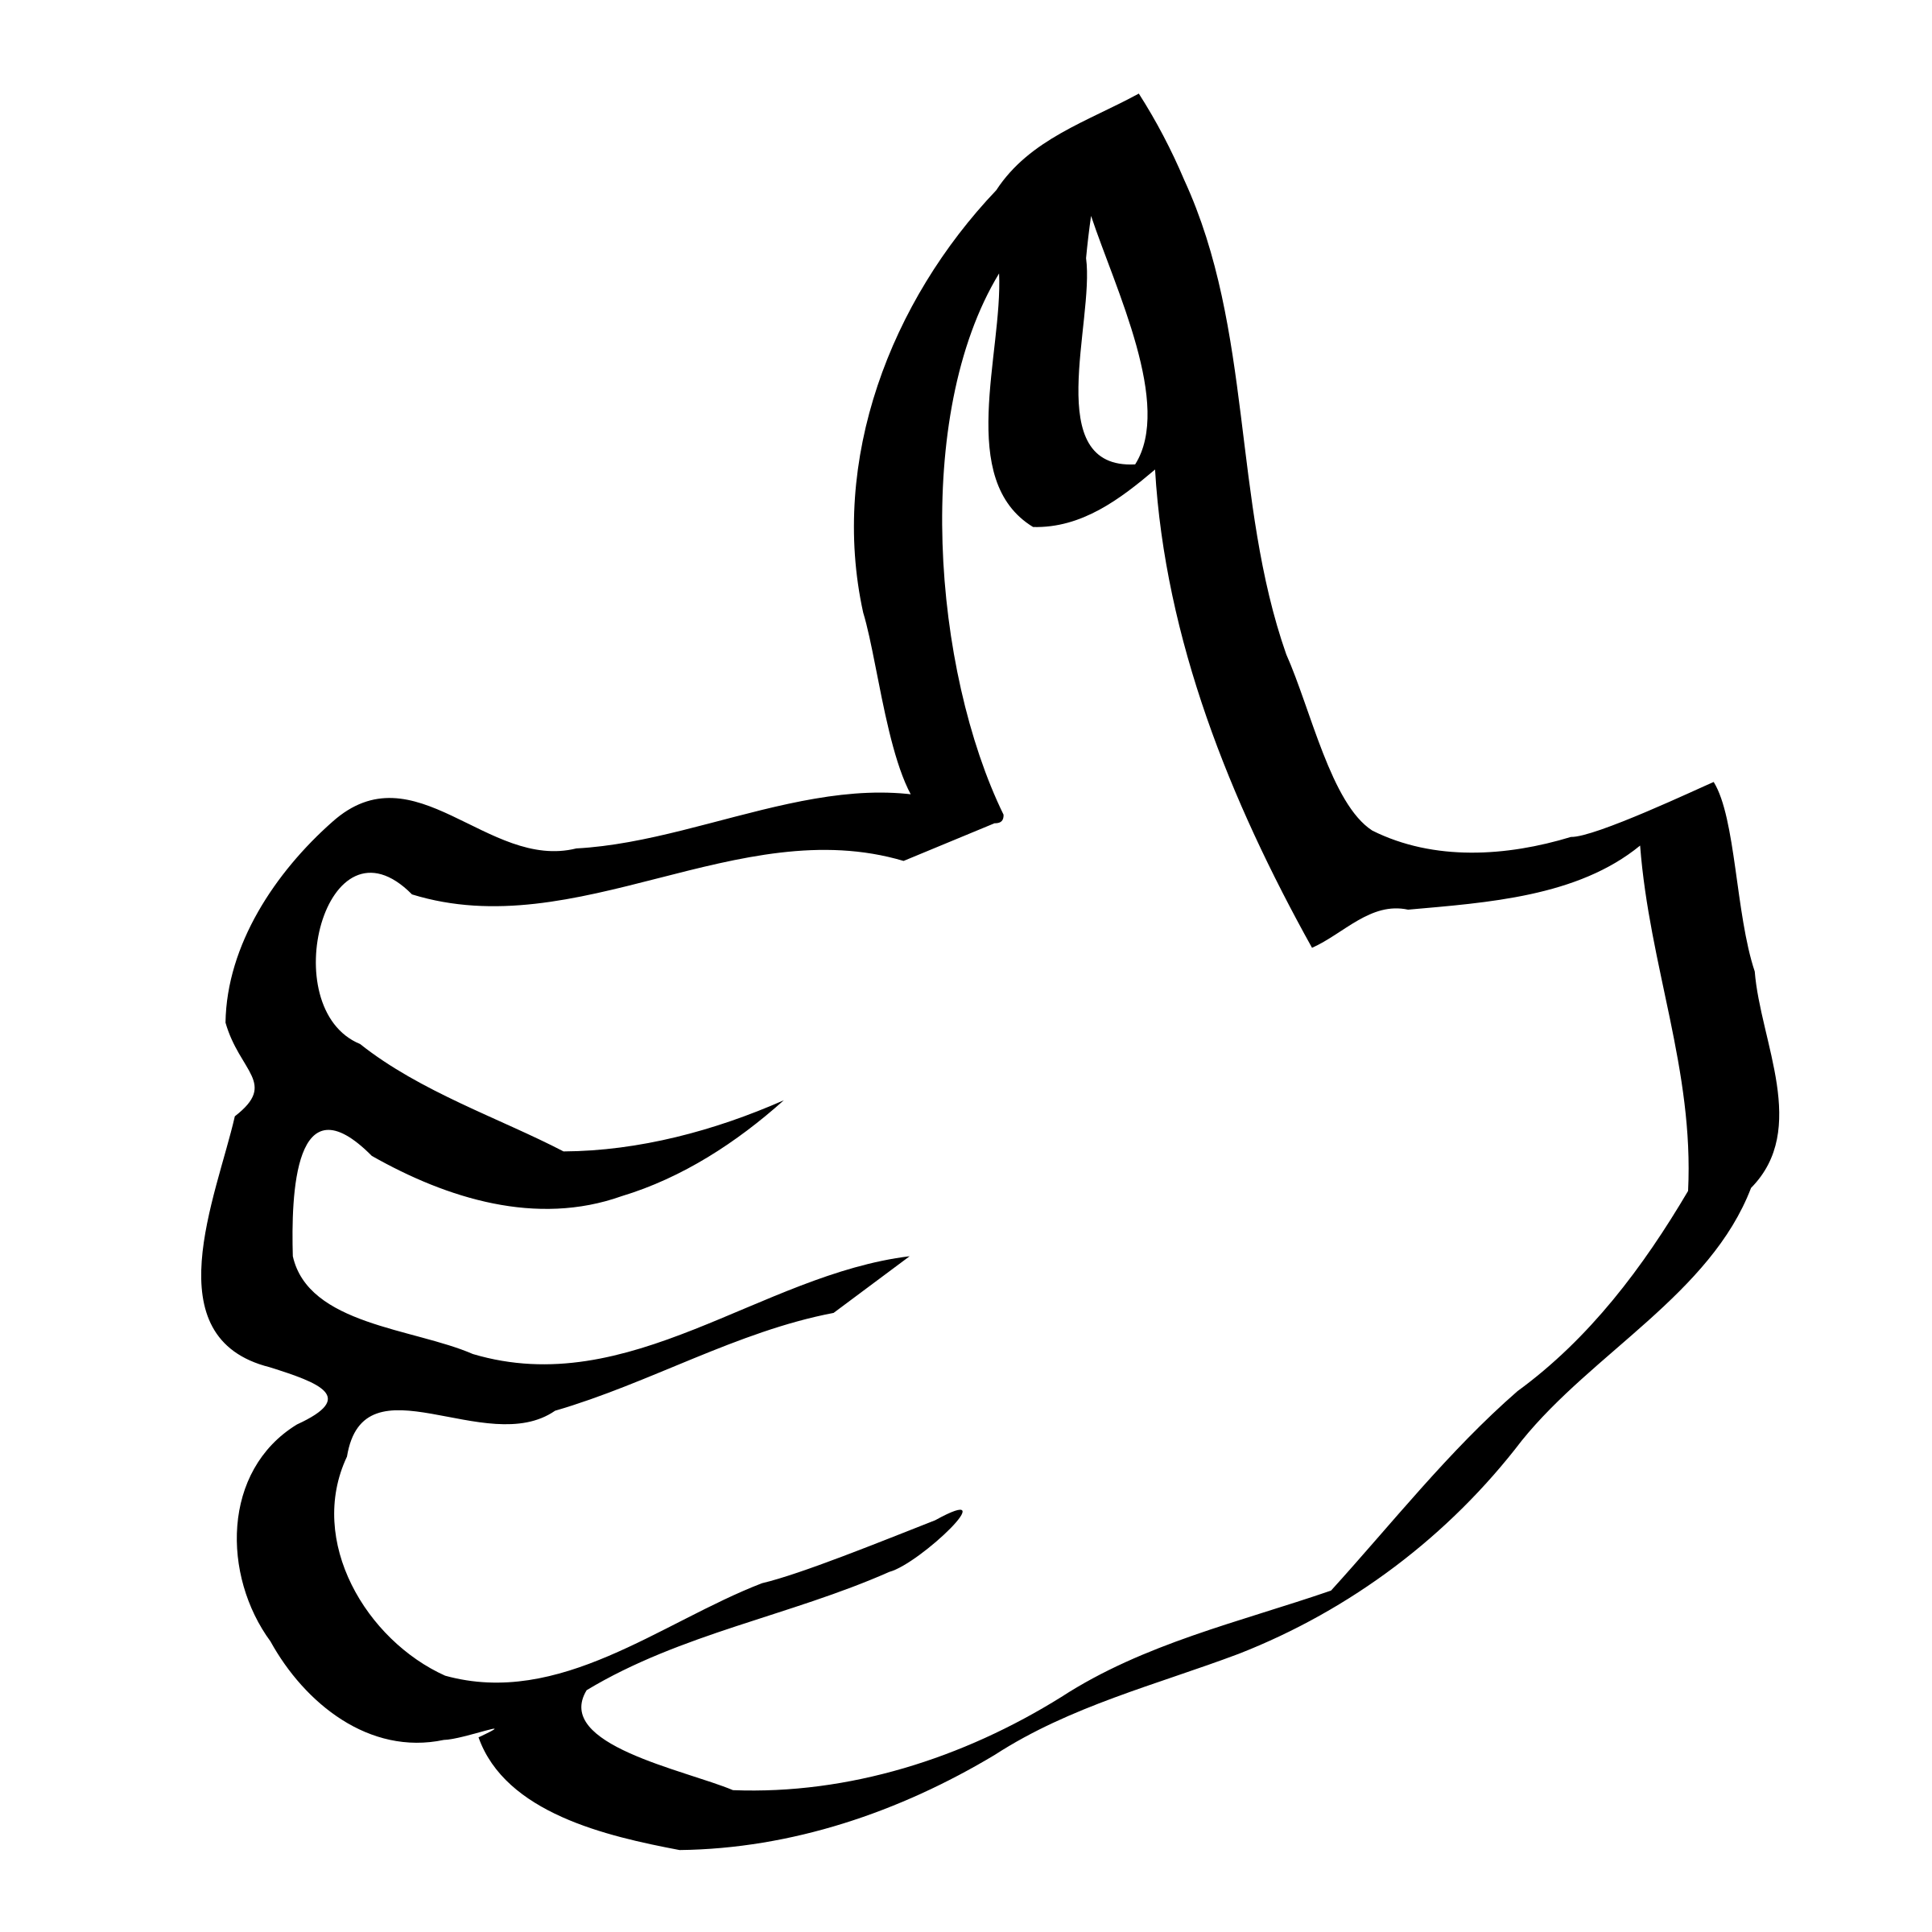 thumb clipart black and white